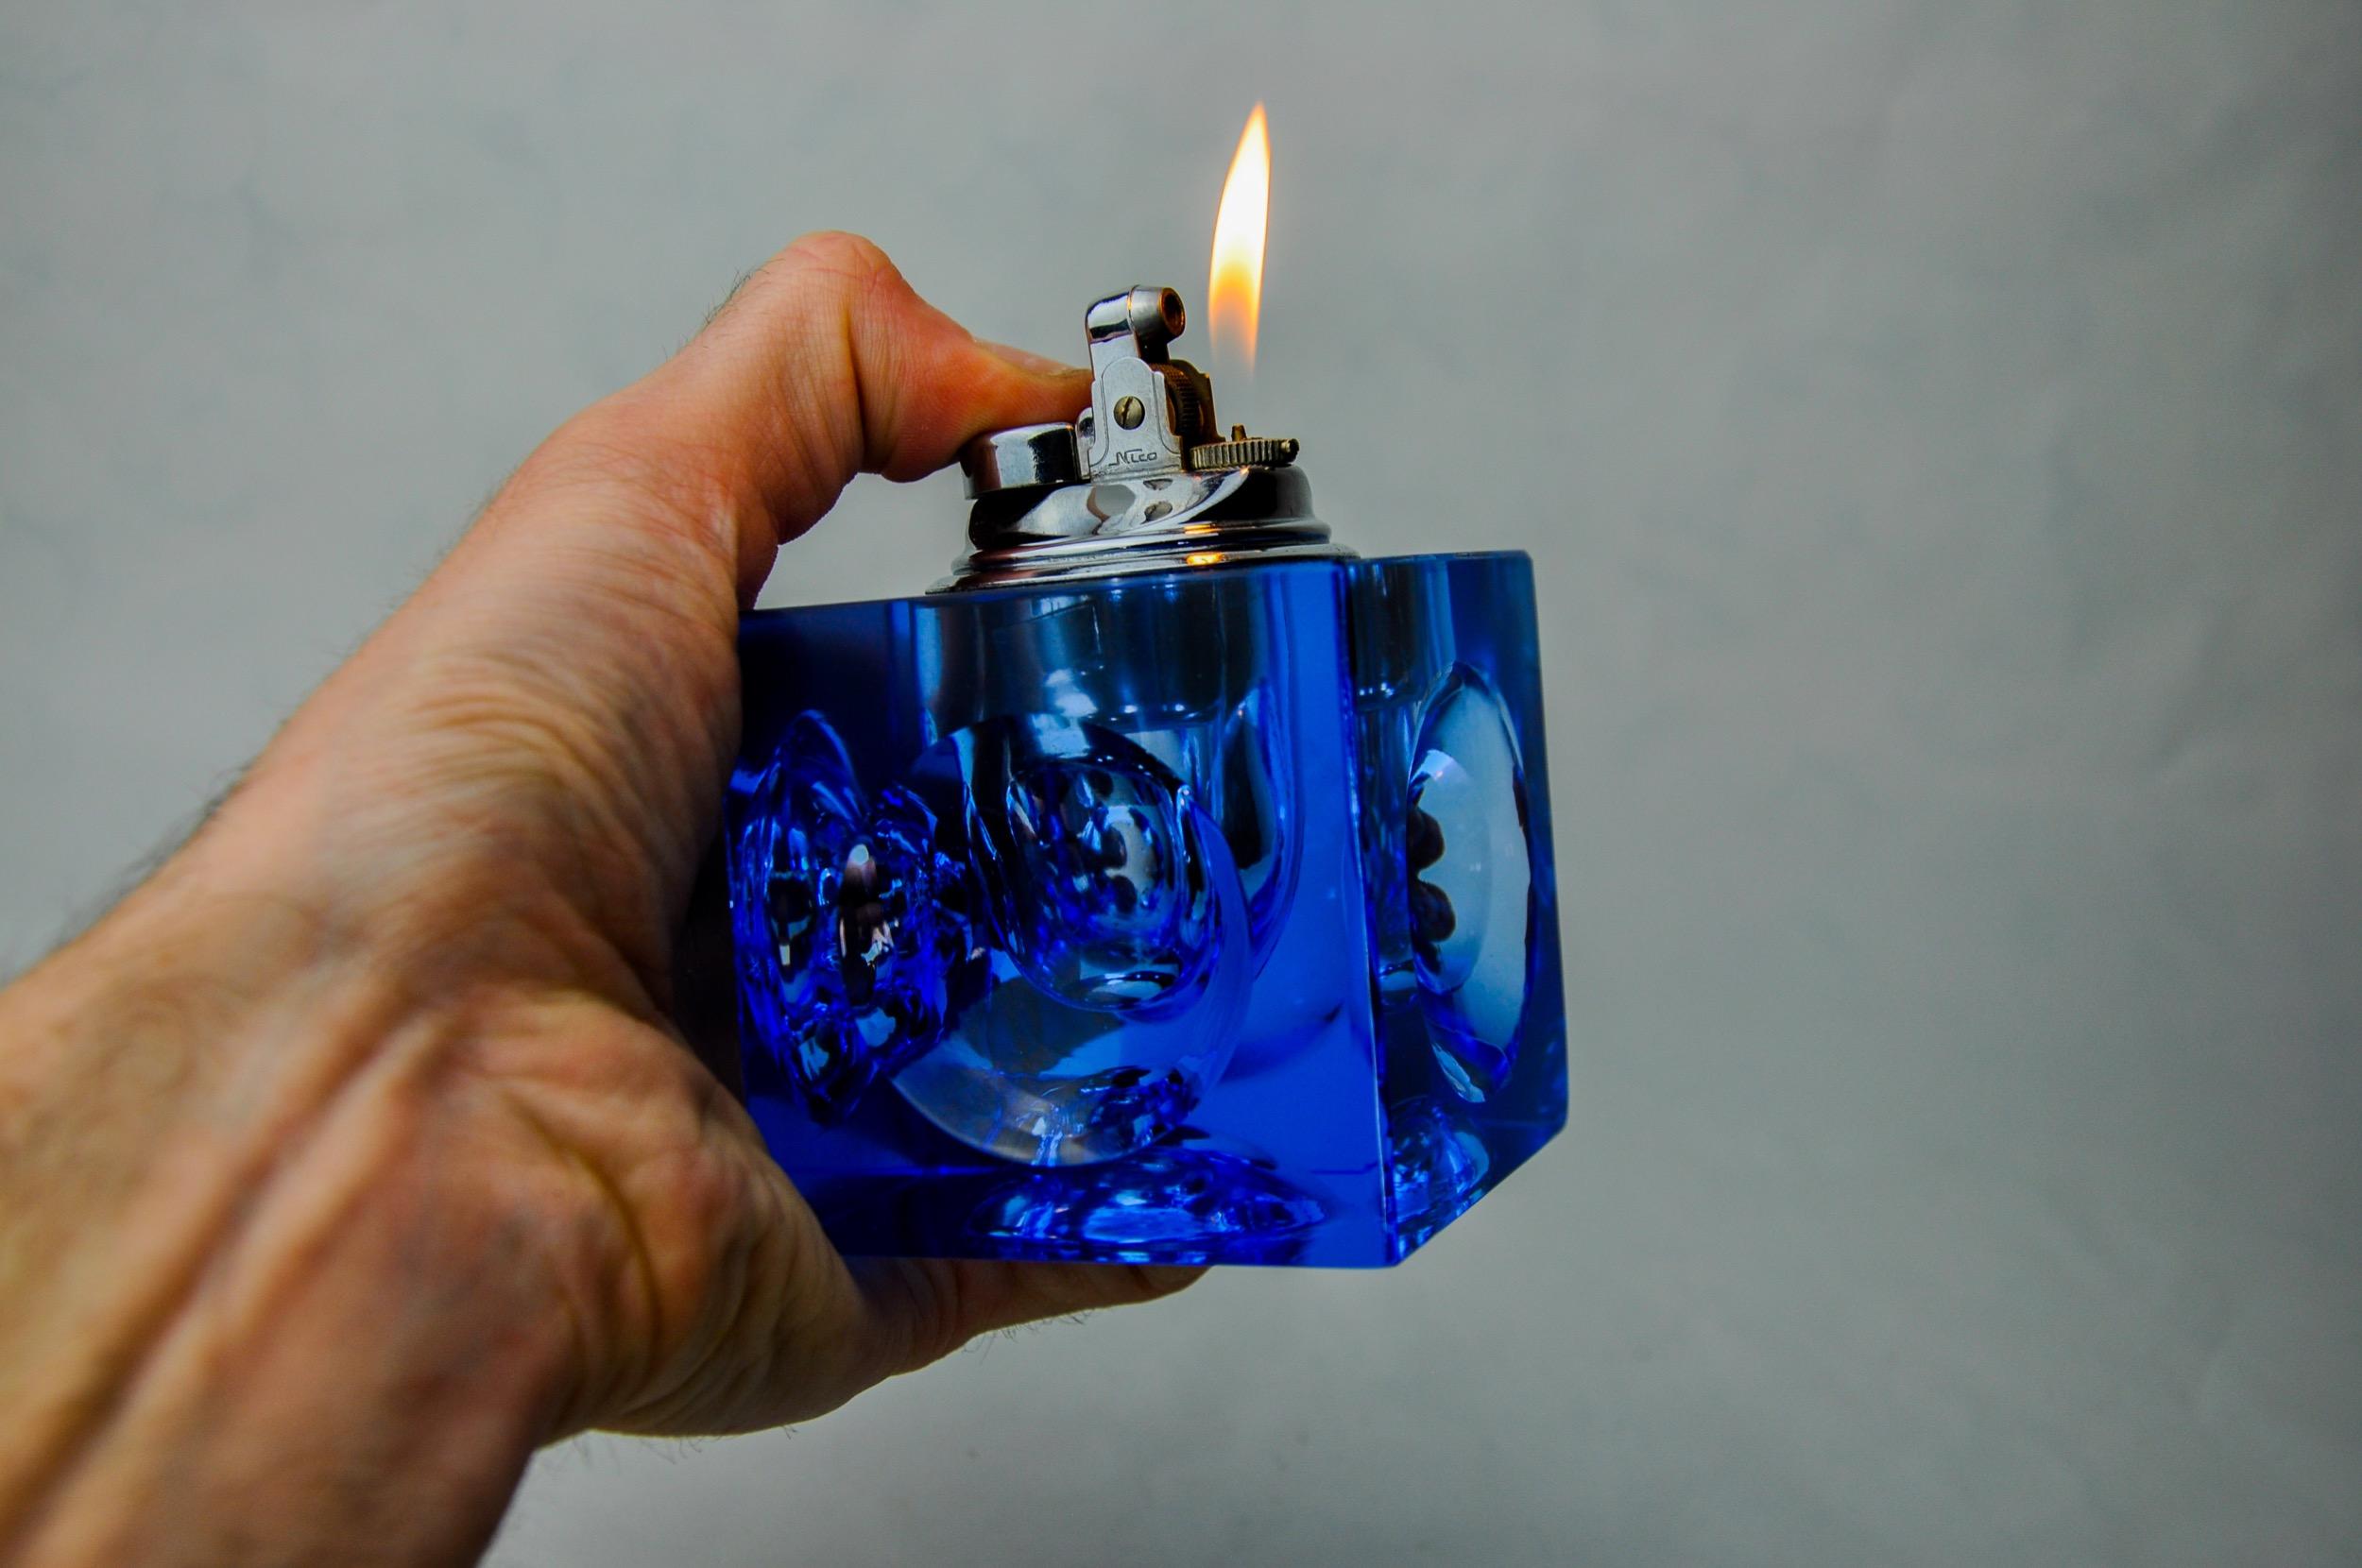 Superb magnifying lighter designed and produced by Antonio Imperatore in Italy in the 1970s. Blue Murano glass lighter with a magnifying effect on its facets, handcrafted by Venetian master glassmakers. Decorative object that will bring a real